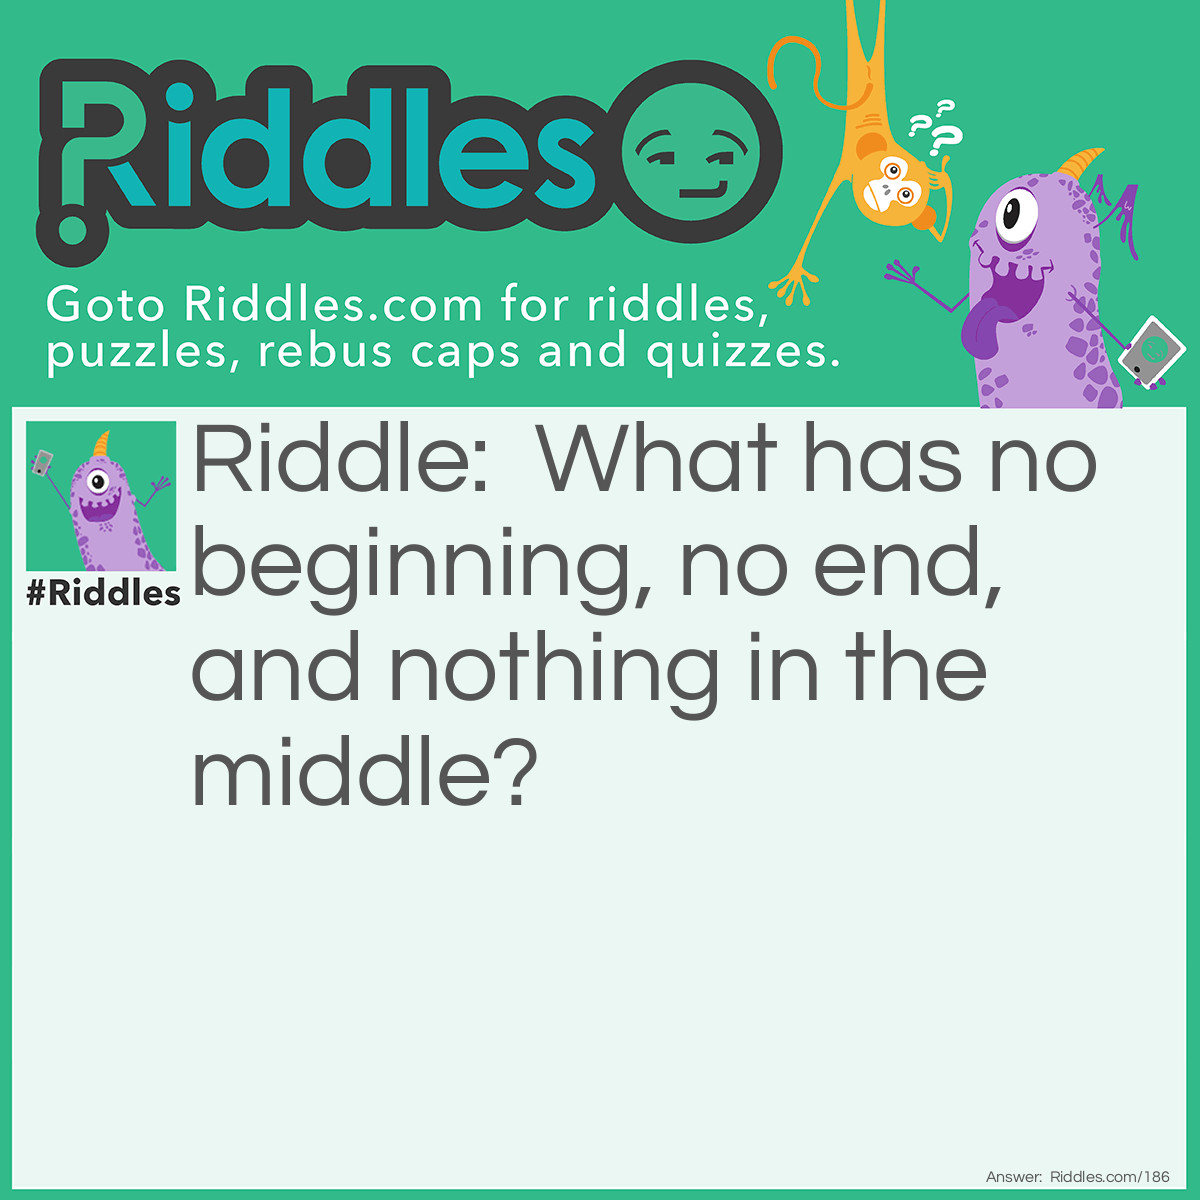 Riddle: What has no beginning, no end, and nothing in the middle? Answer: A doughnut (also a donut) or an ellipse like a circle and oval.